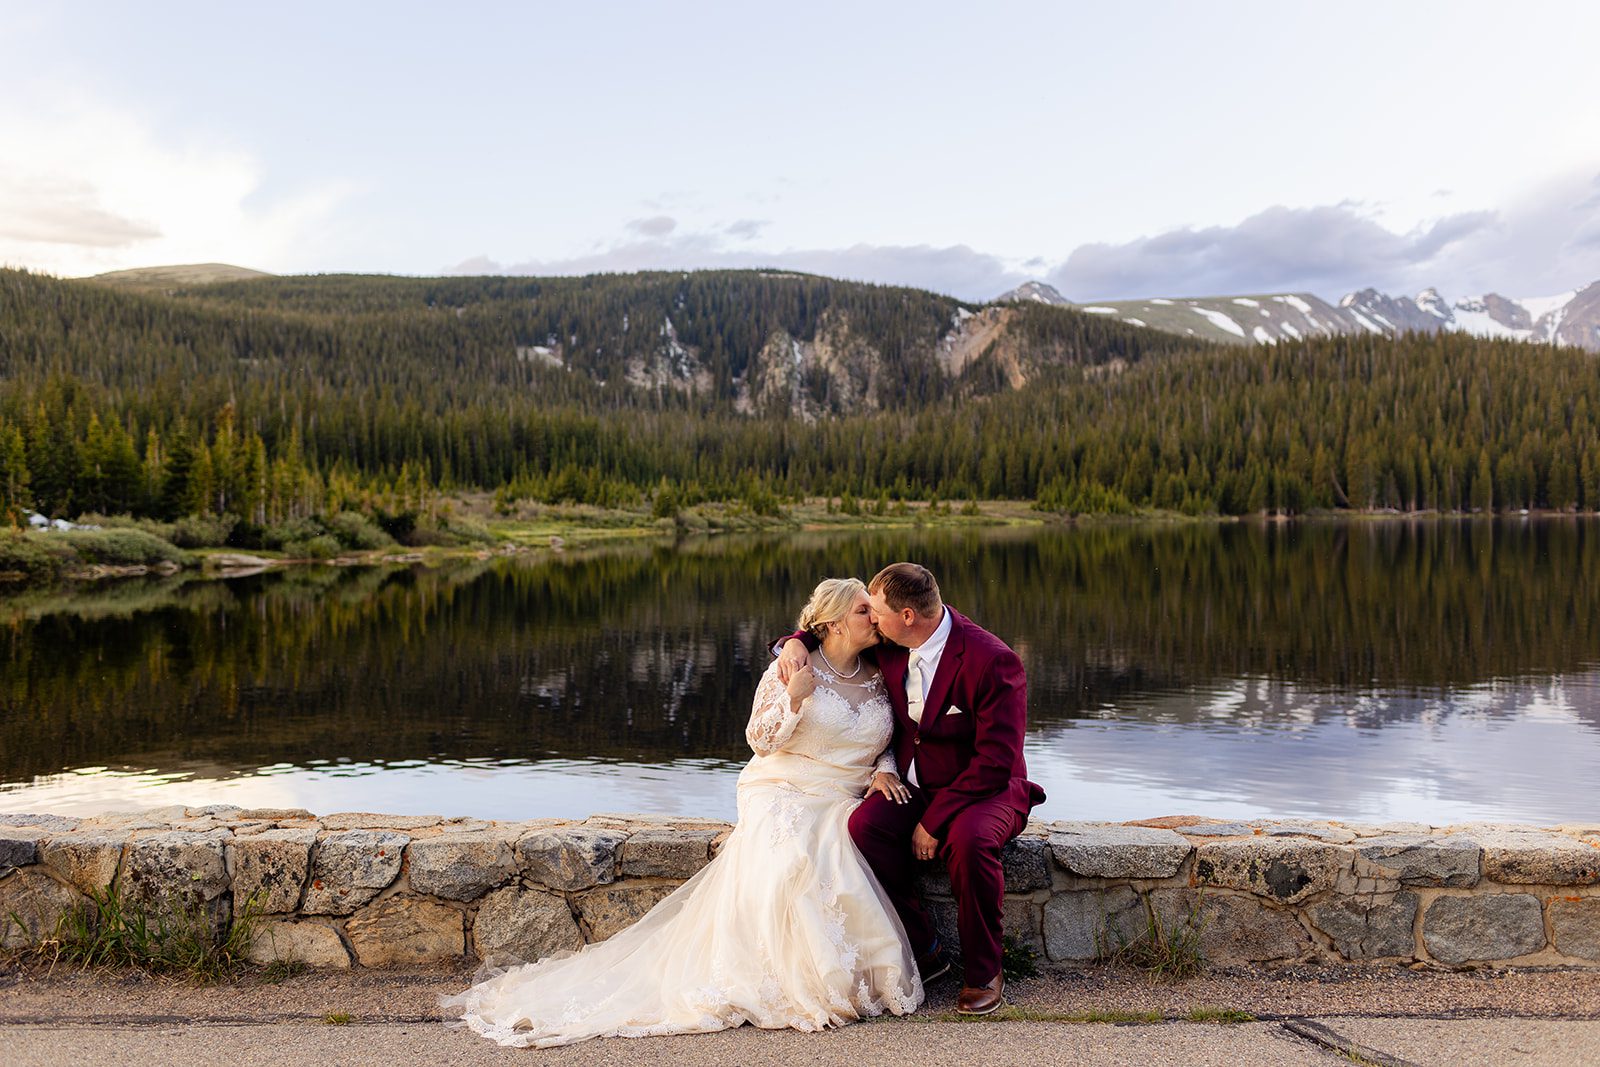 Bride and groom kissing next the gorgeous alpine lake.